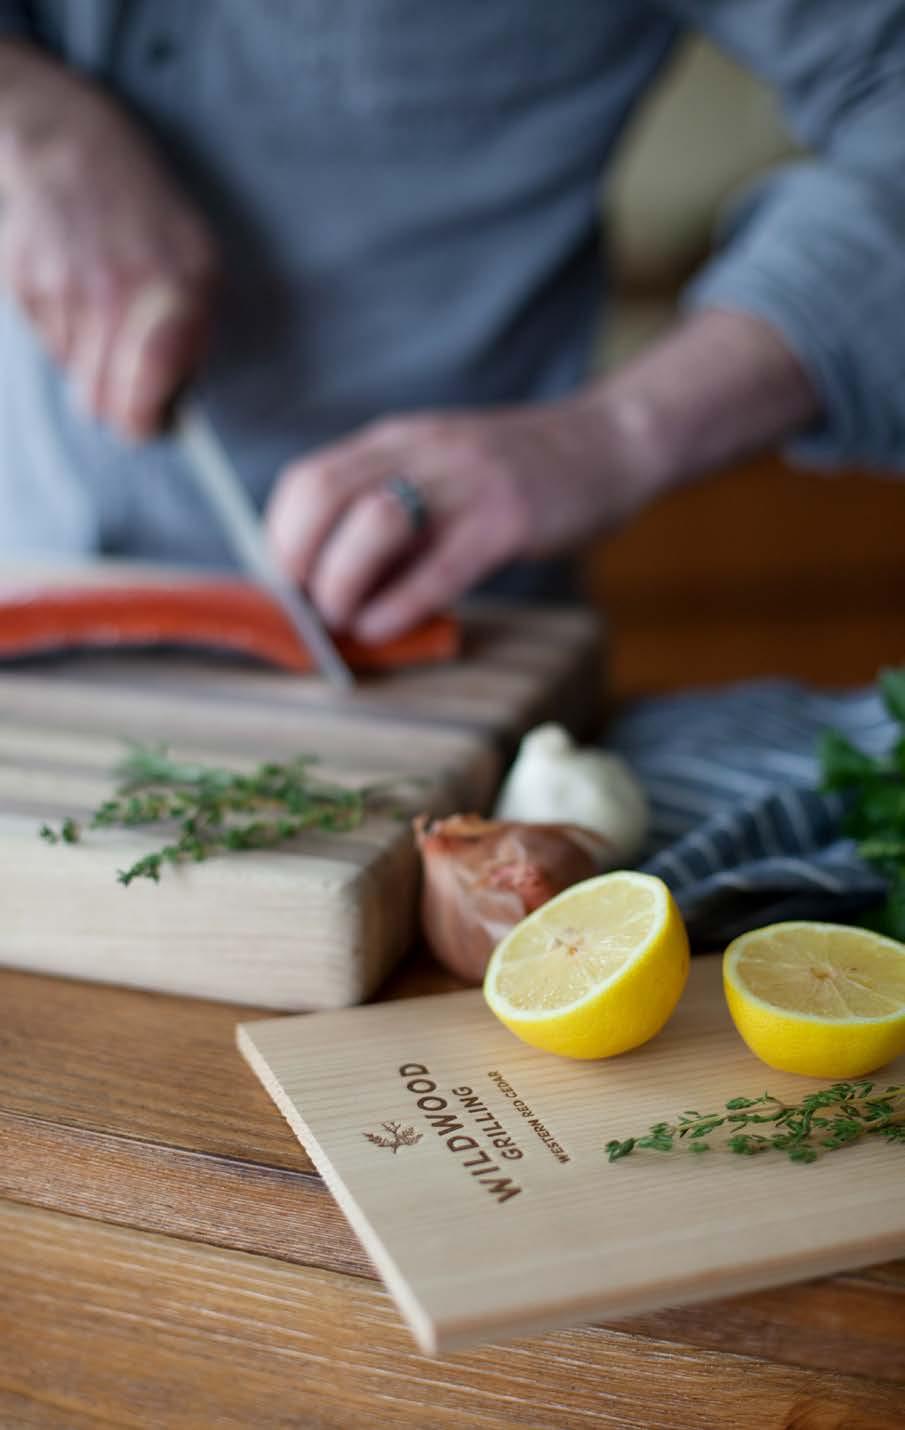 MEAL KITS Elevate any dish by including sustainably sourced wood products in your meal kit offering.